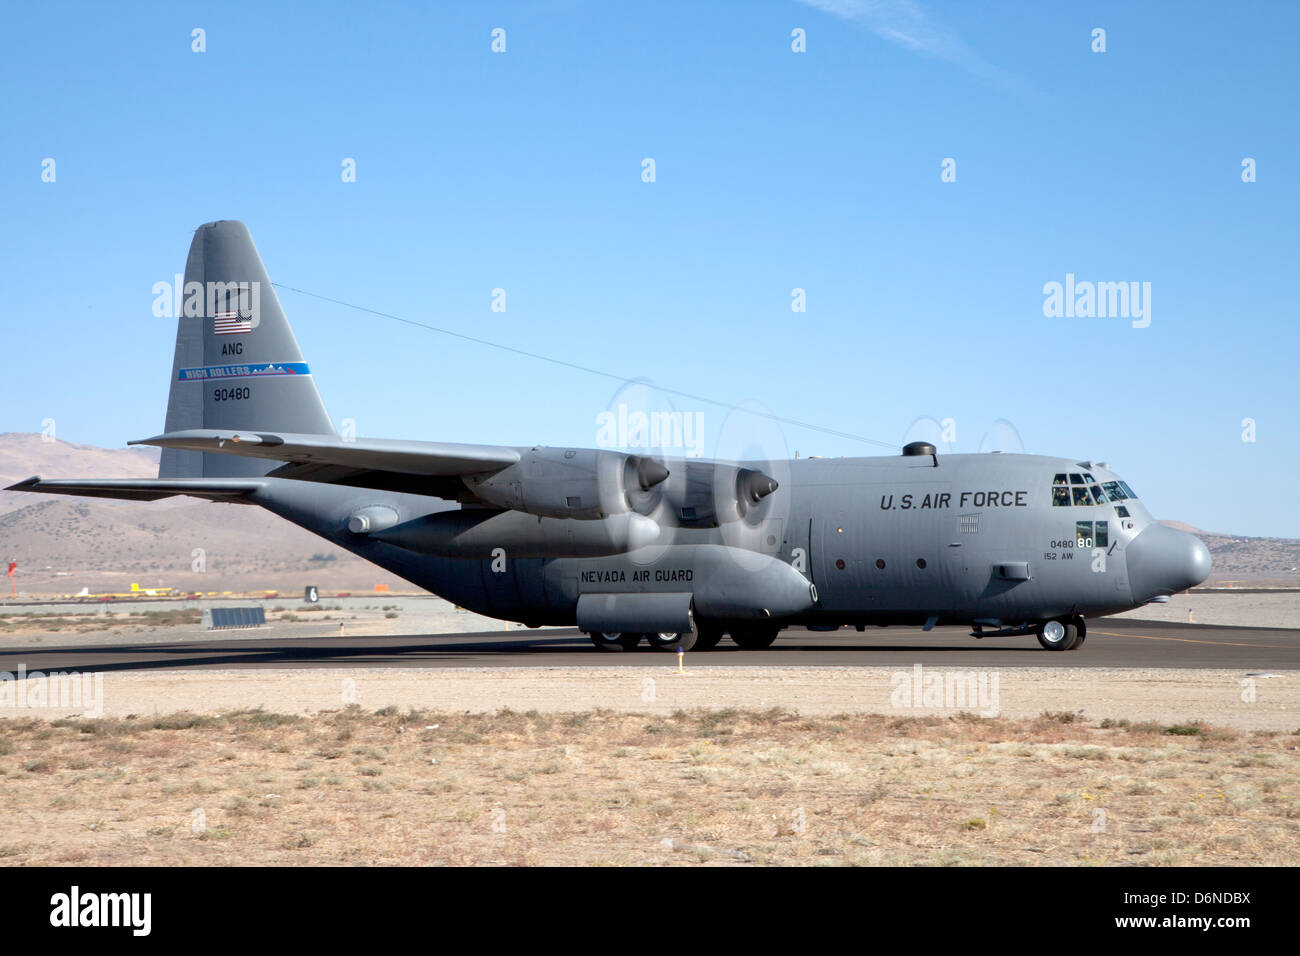 Lockheed C-130 Hercules of the 152nd Airlift Wing, Nevada Air National Guard, based in Reno, Nevada. Stock Photo